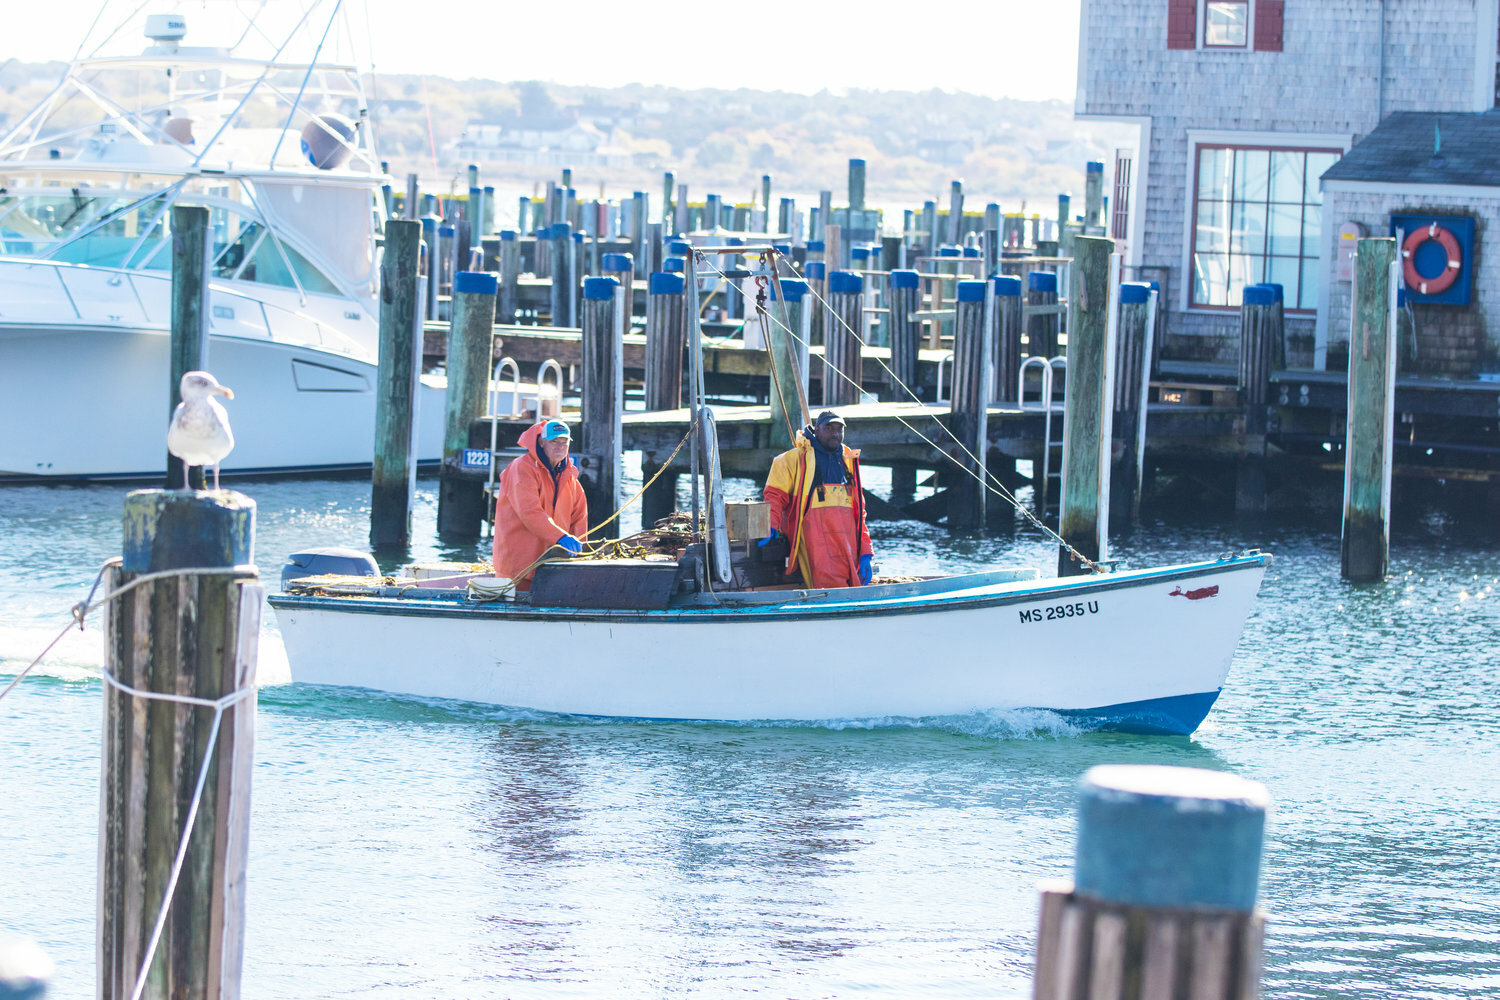 Scallopers return to the dock on the second day of the 2022-2023 commercial season last November.